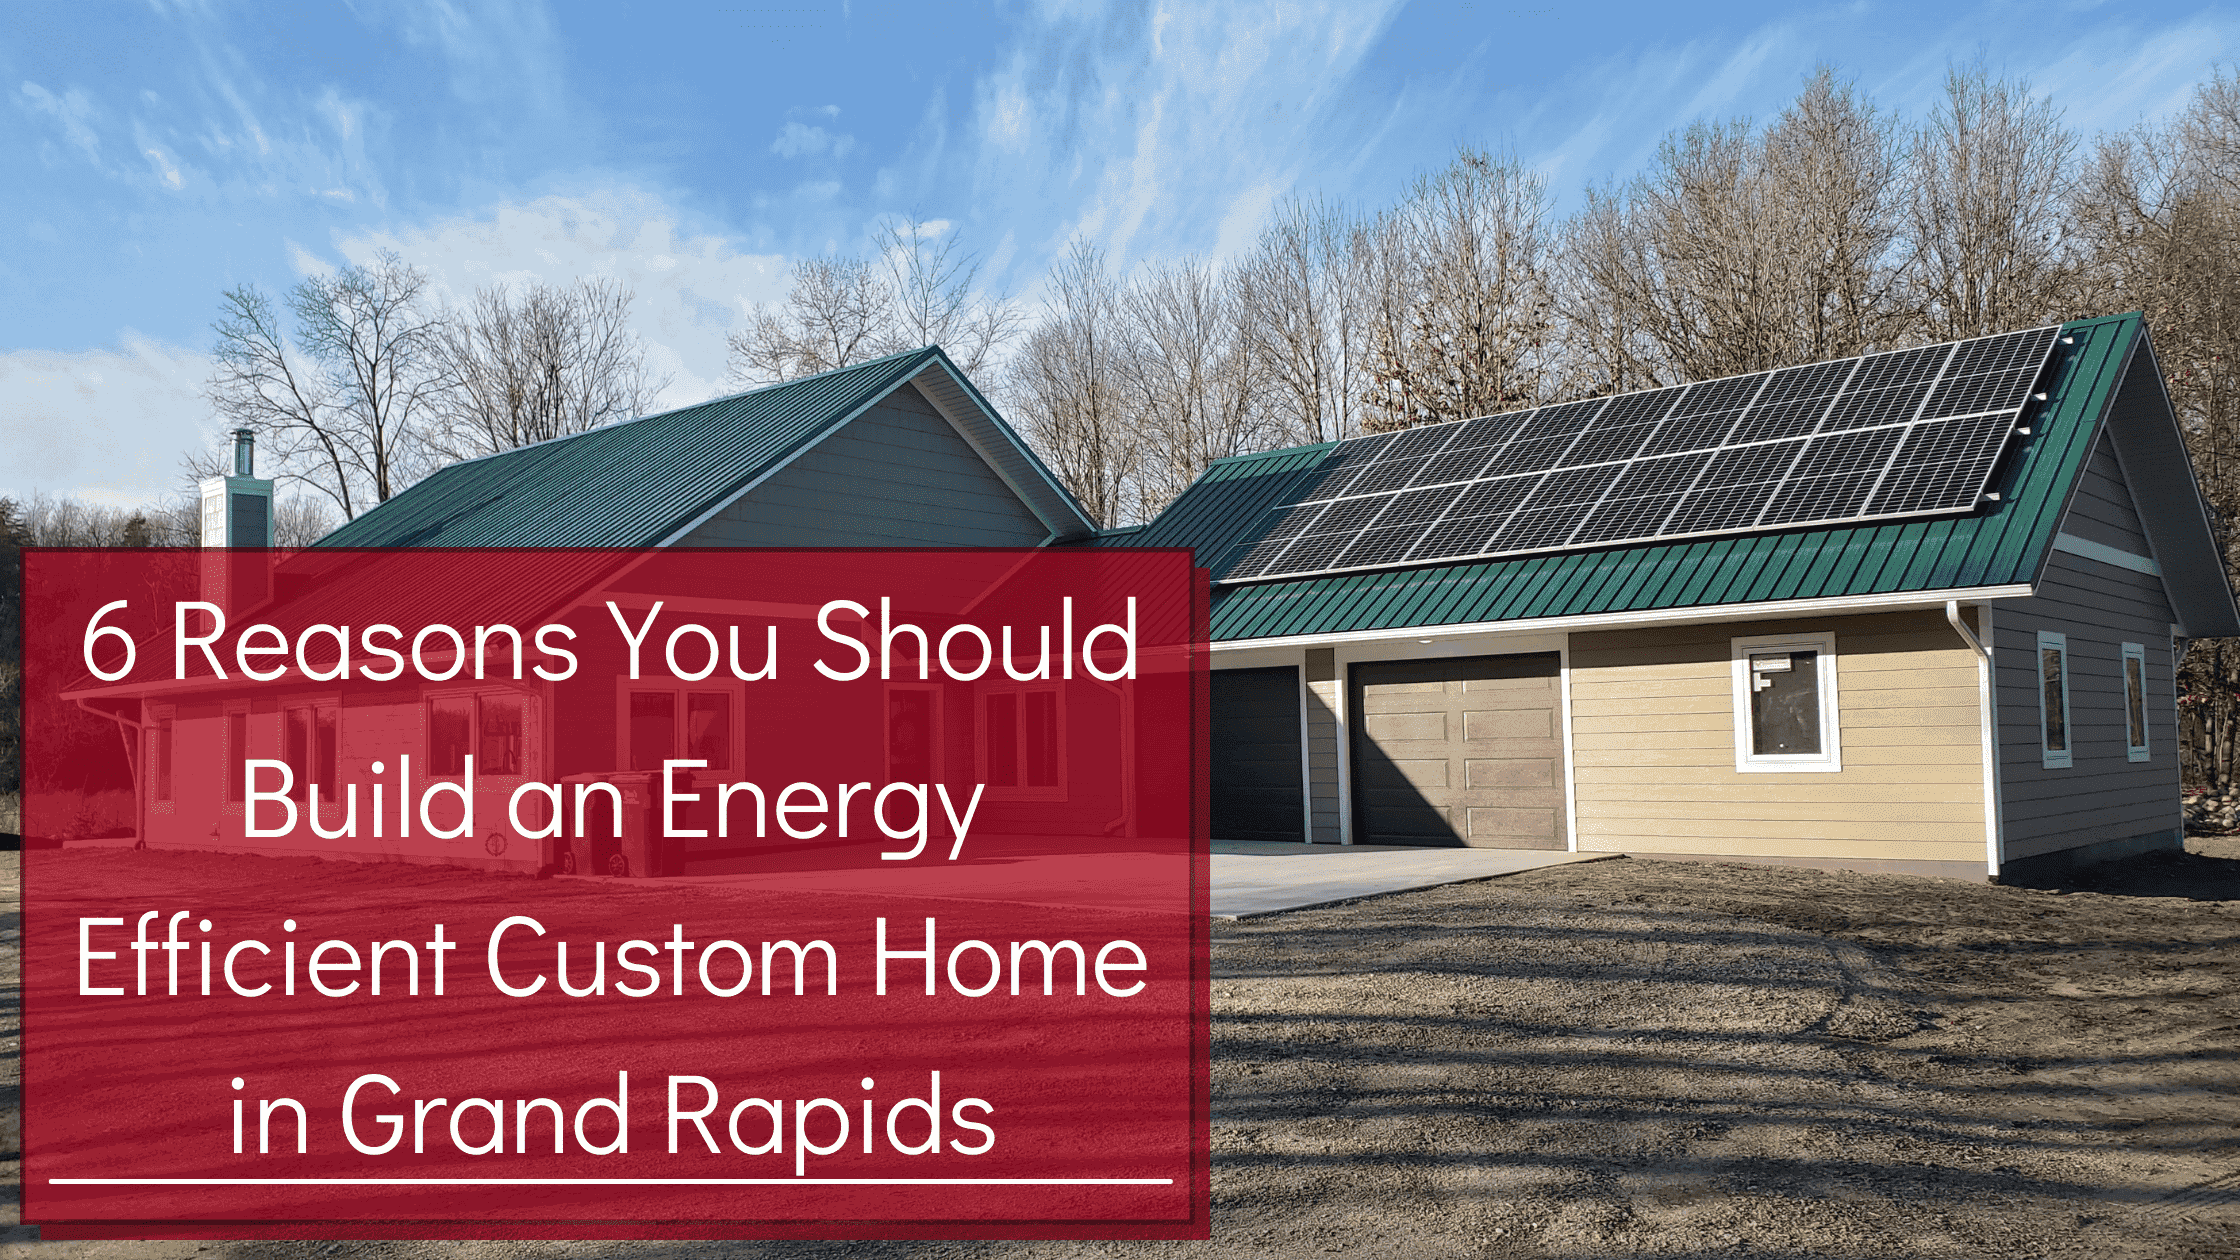 6 Reasons to Build an Energy Efficient Custom Home in Grand Rapids